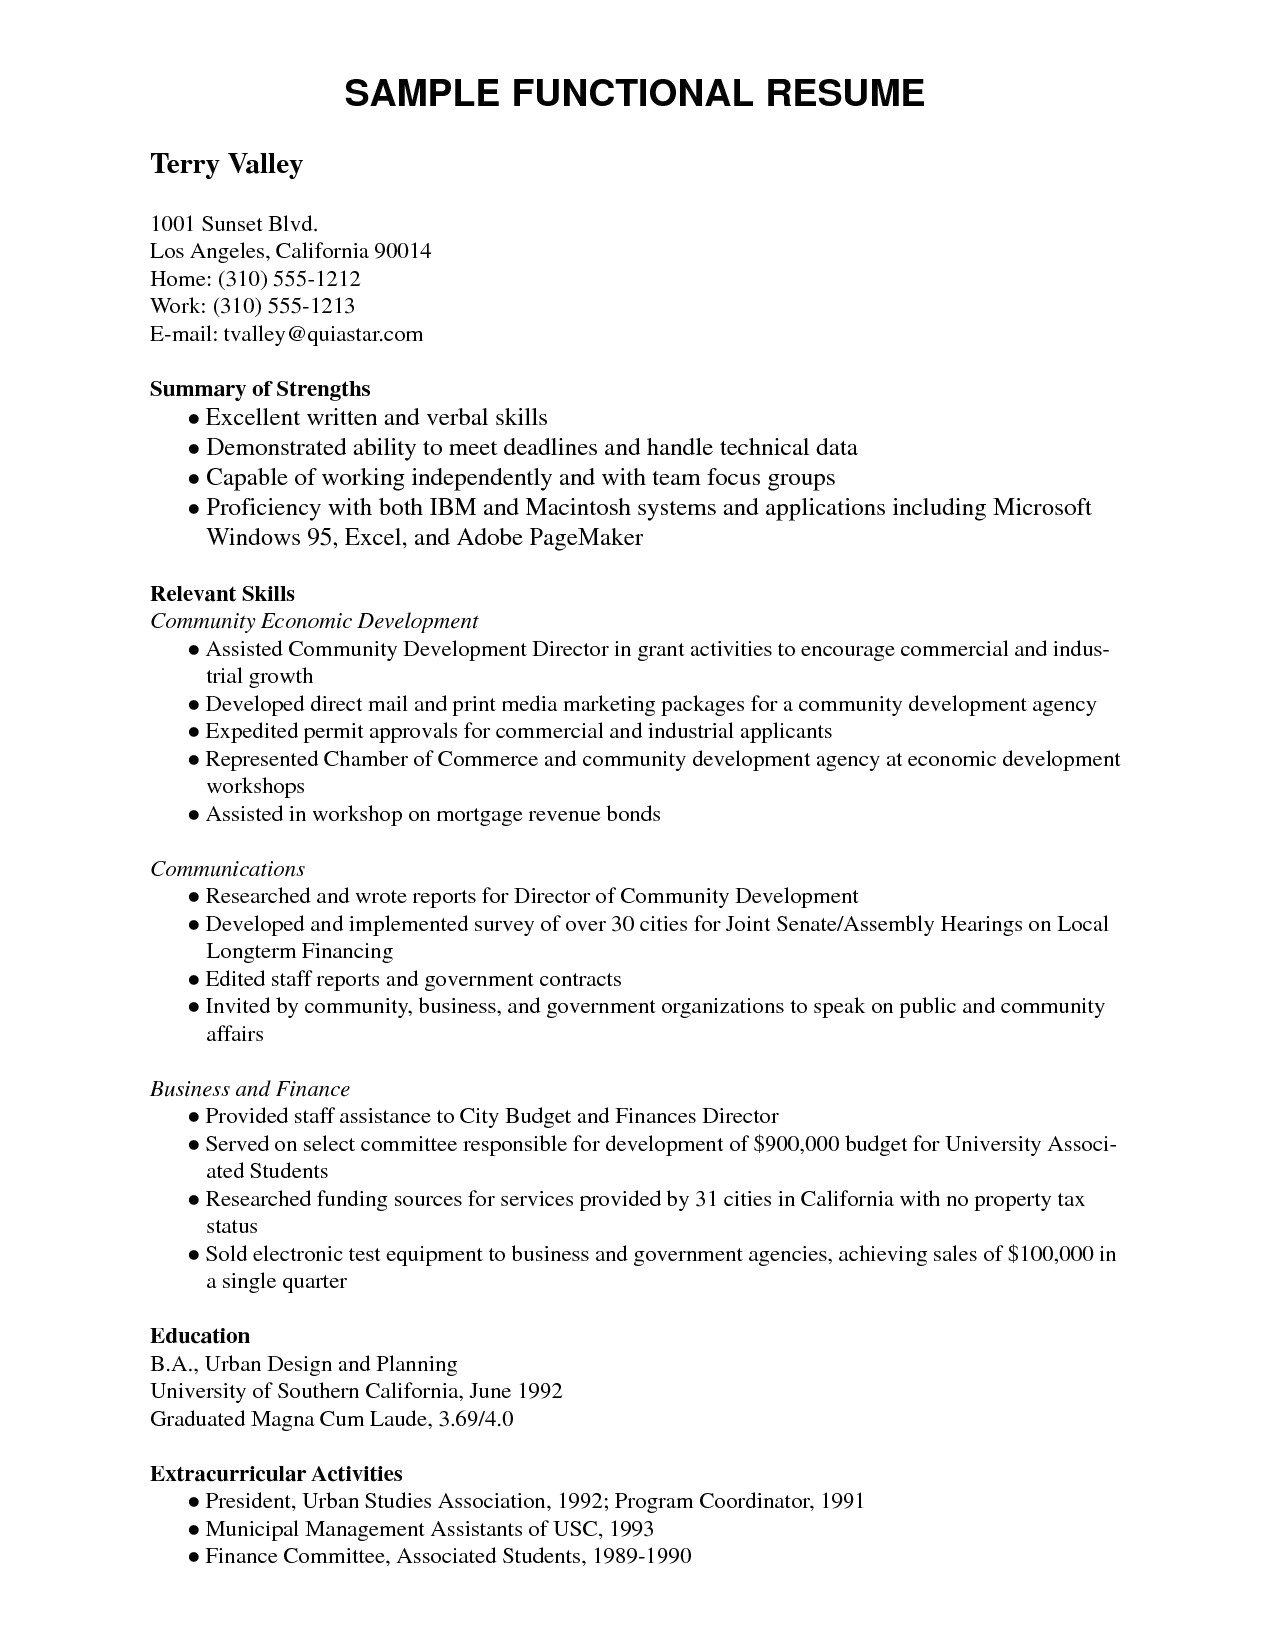 Letter to Senator Template - 64 Concepts Resume Writing Template